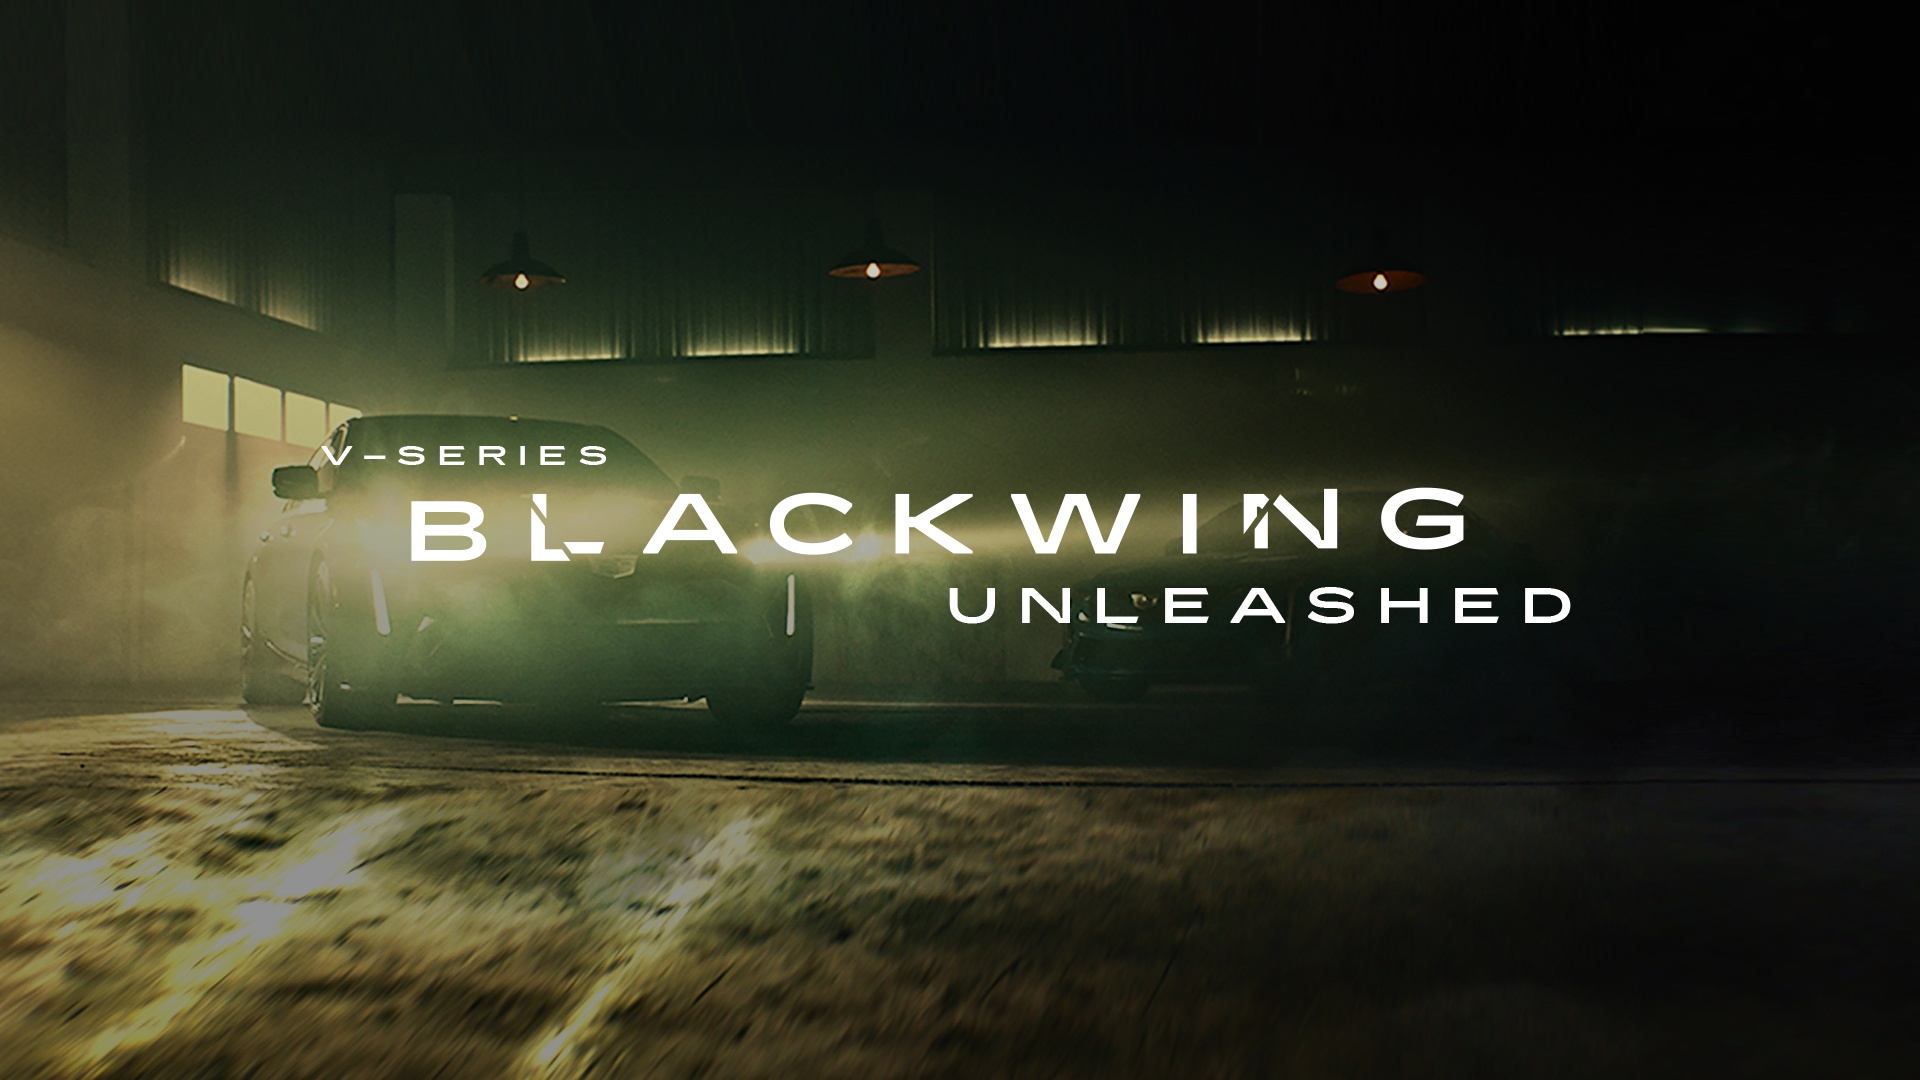 Tune into Blackwing Unleashed for the regional unveiling of the 2022 Cadillac V-Series Blackwings on November